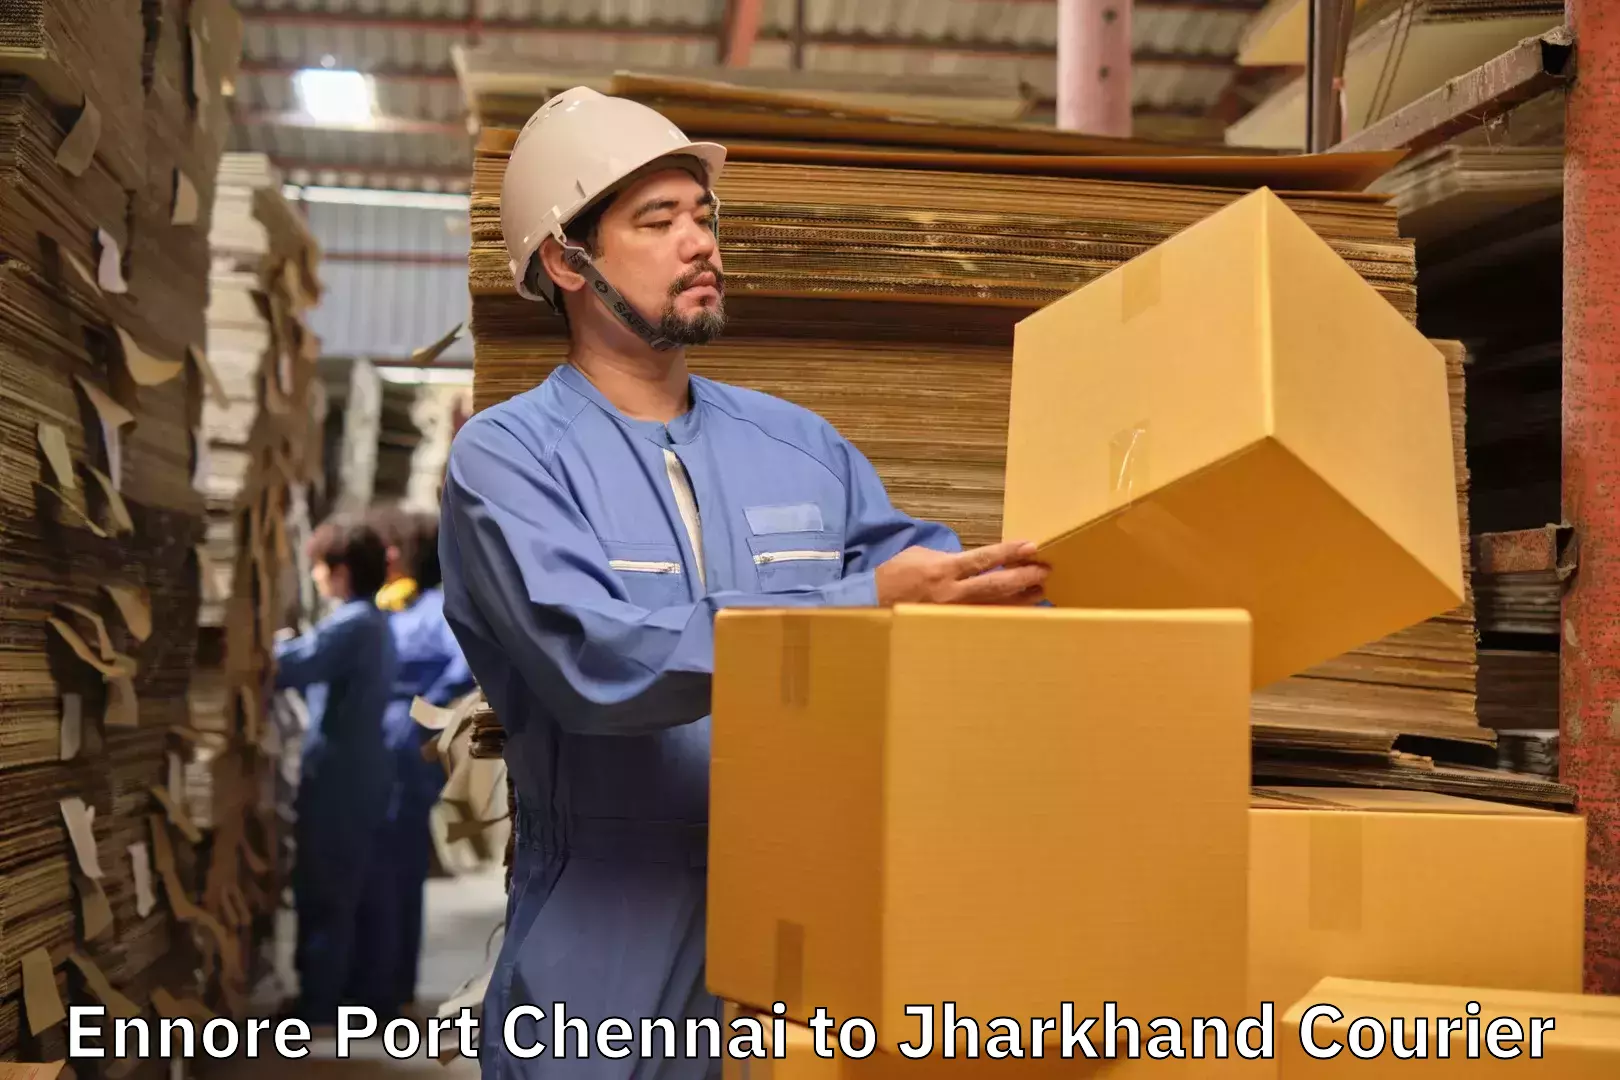 Baggage delivery estimate Ennore Port Chennai to Tandwa